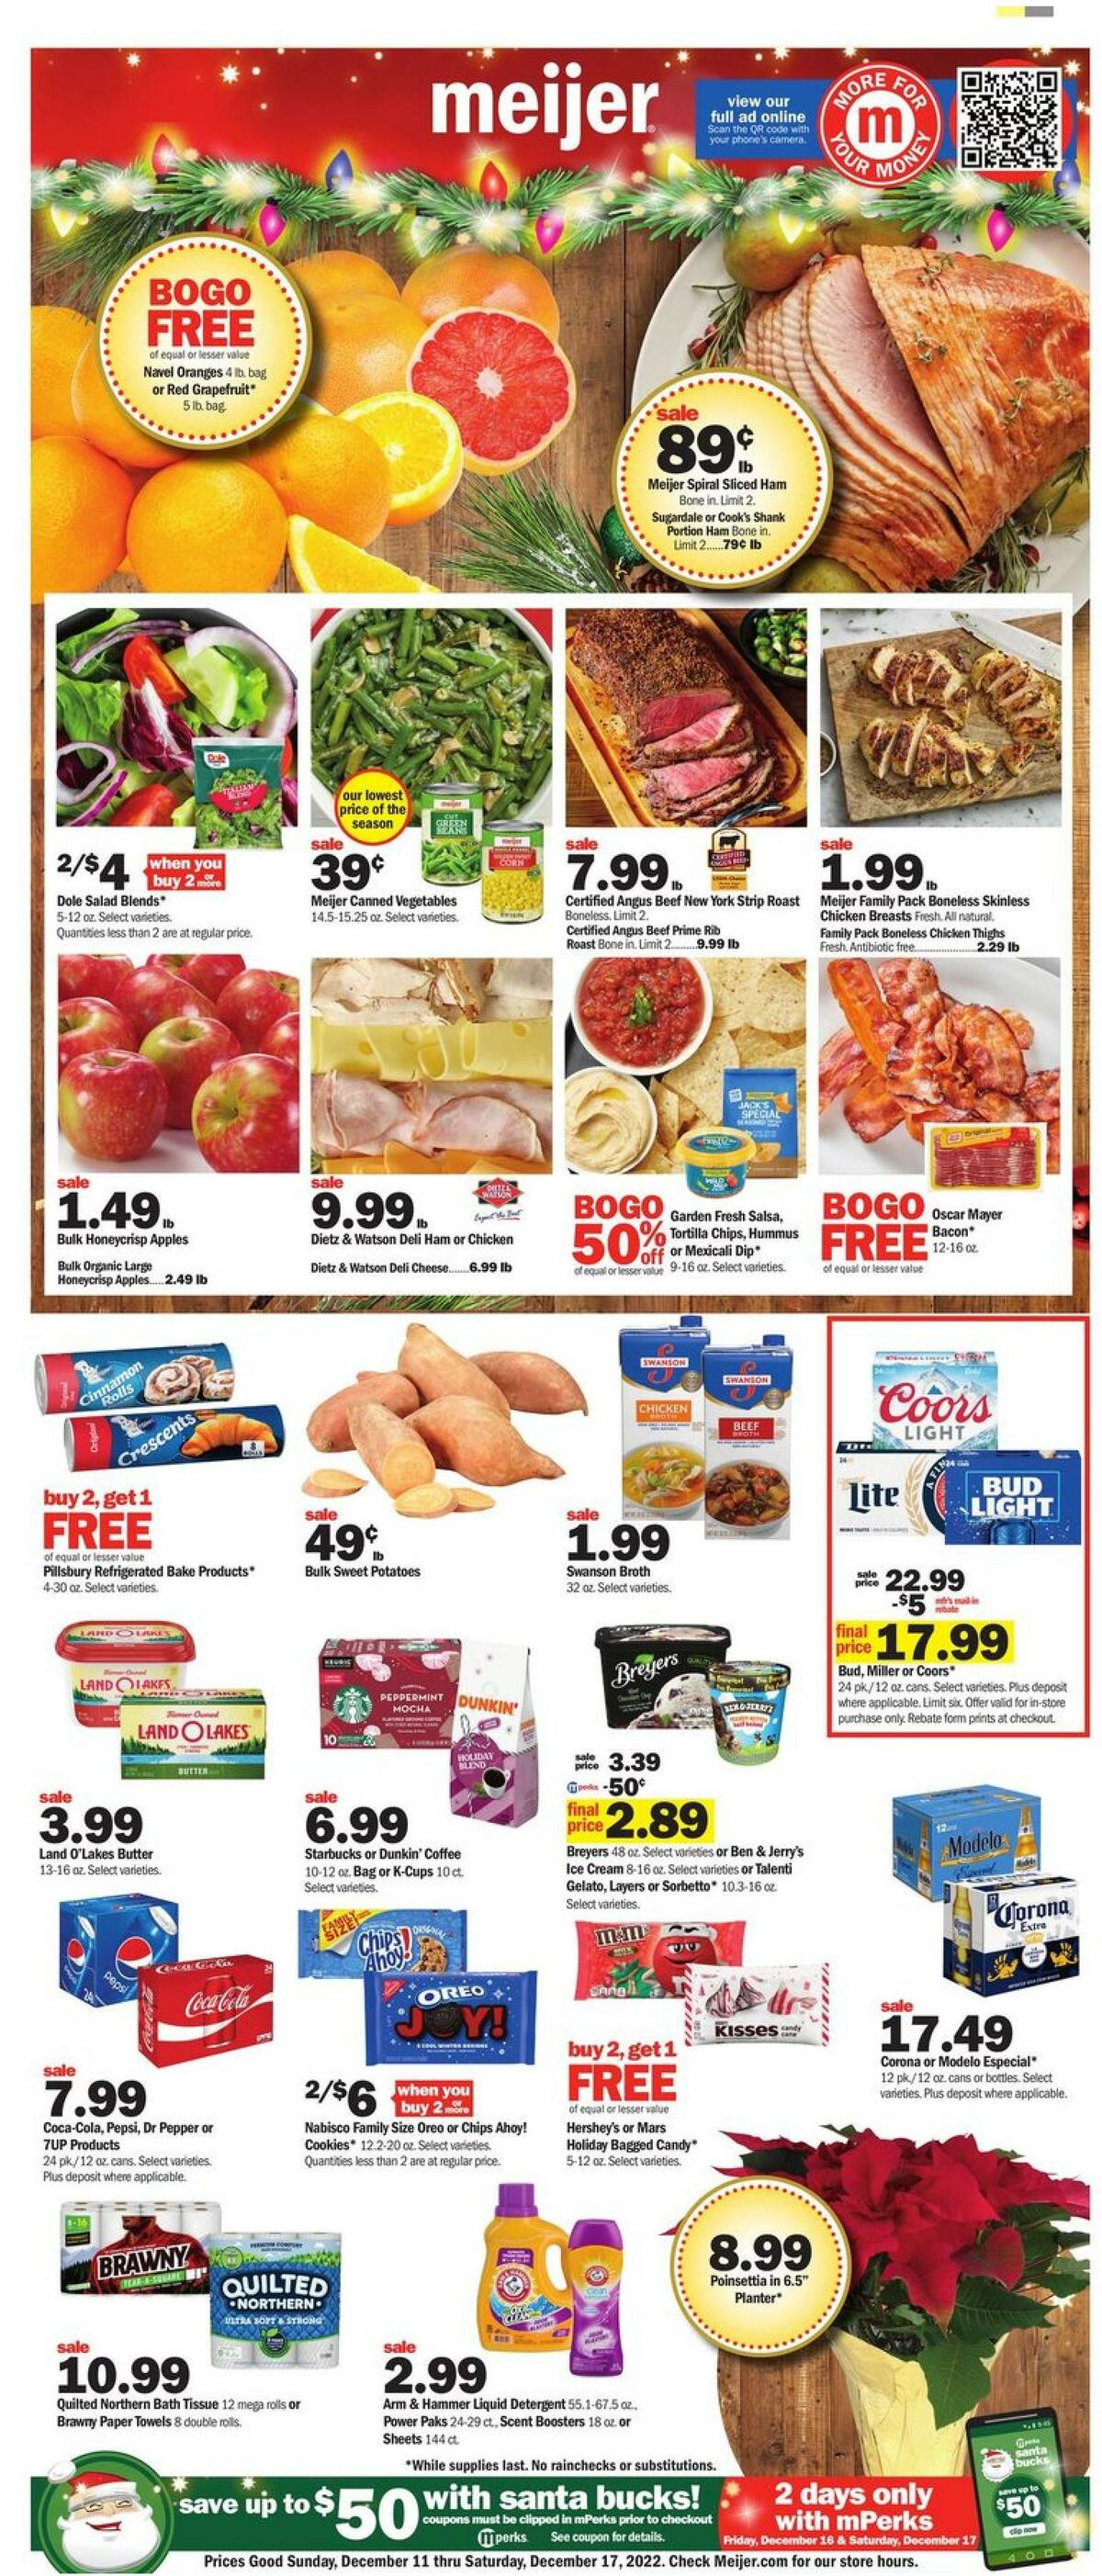 Meijer Weekly Ad from December 11